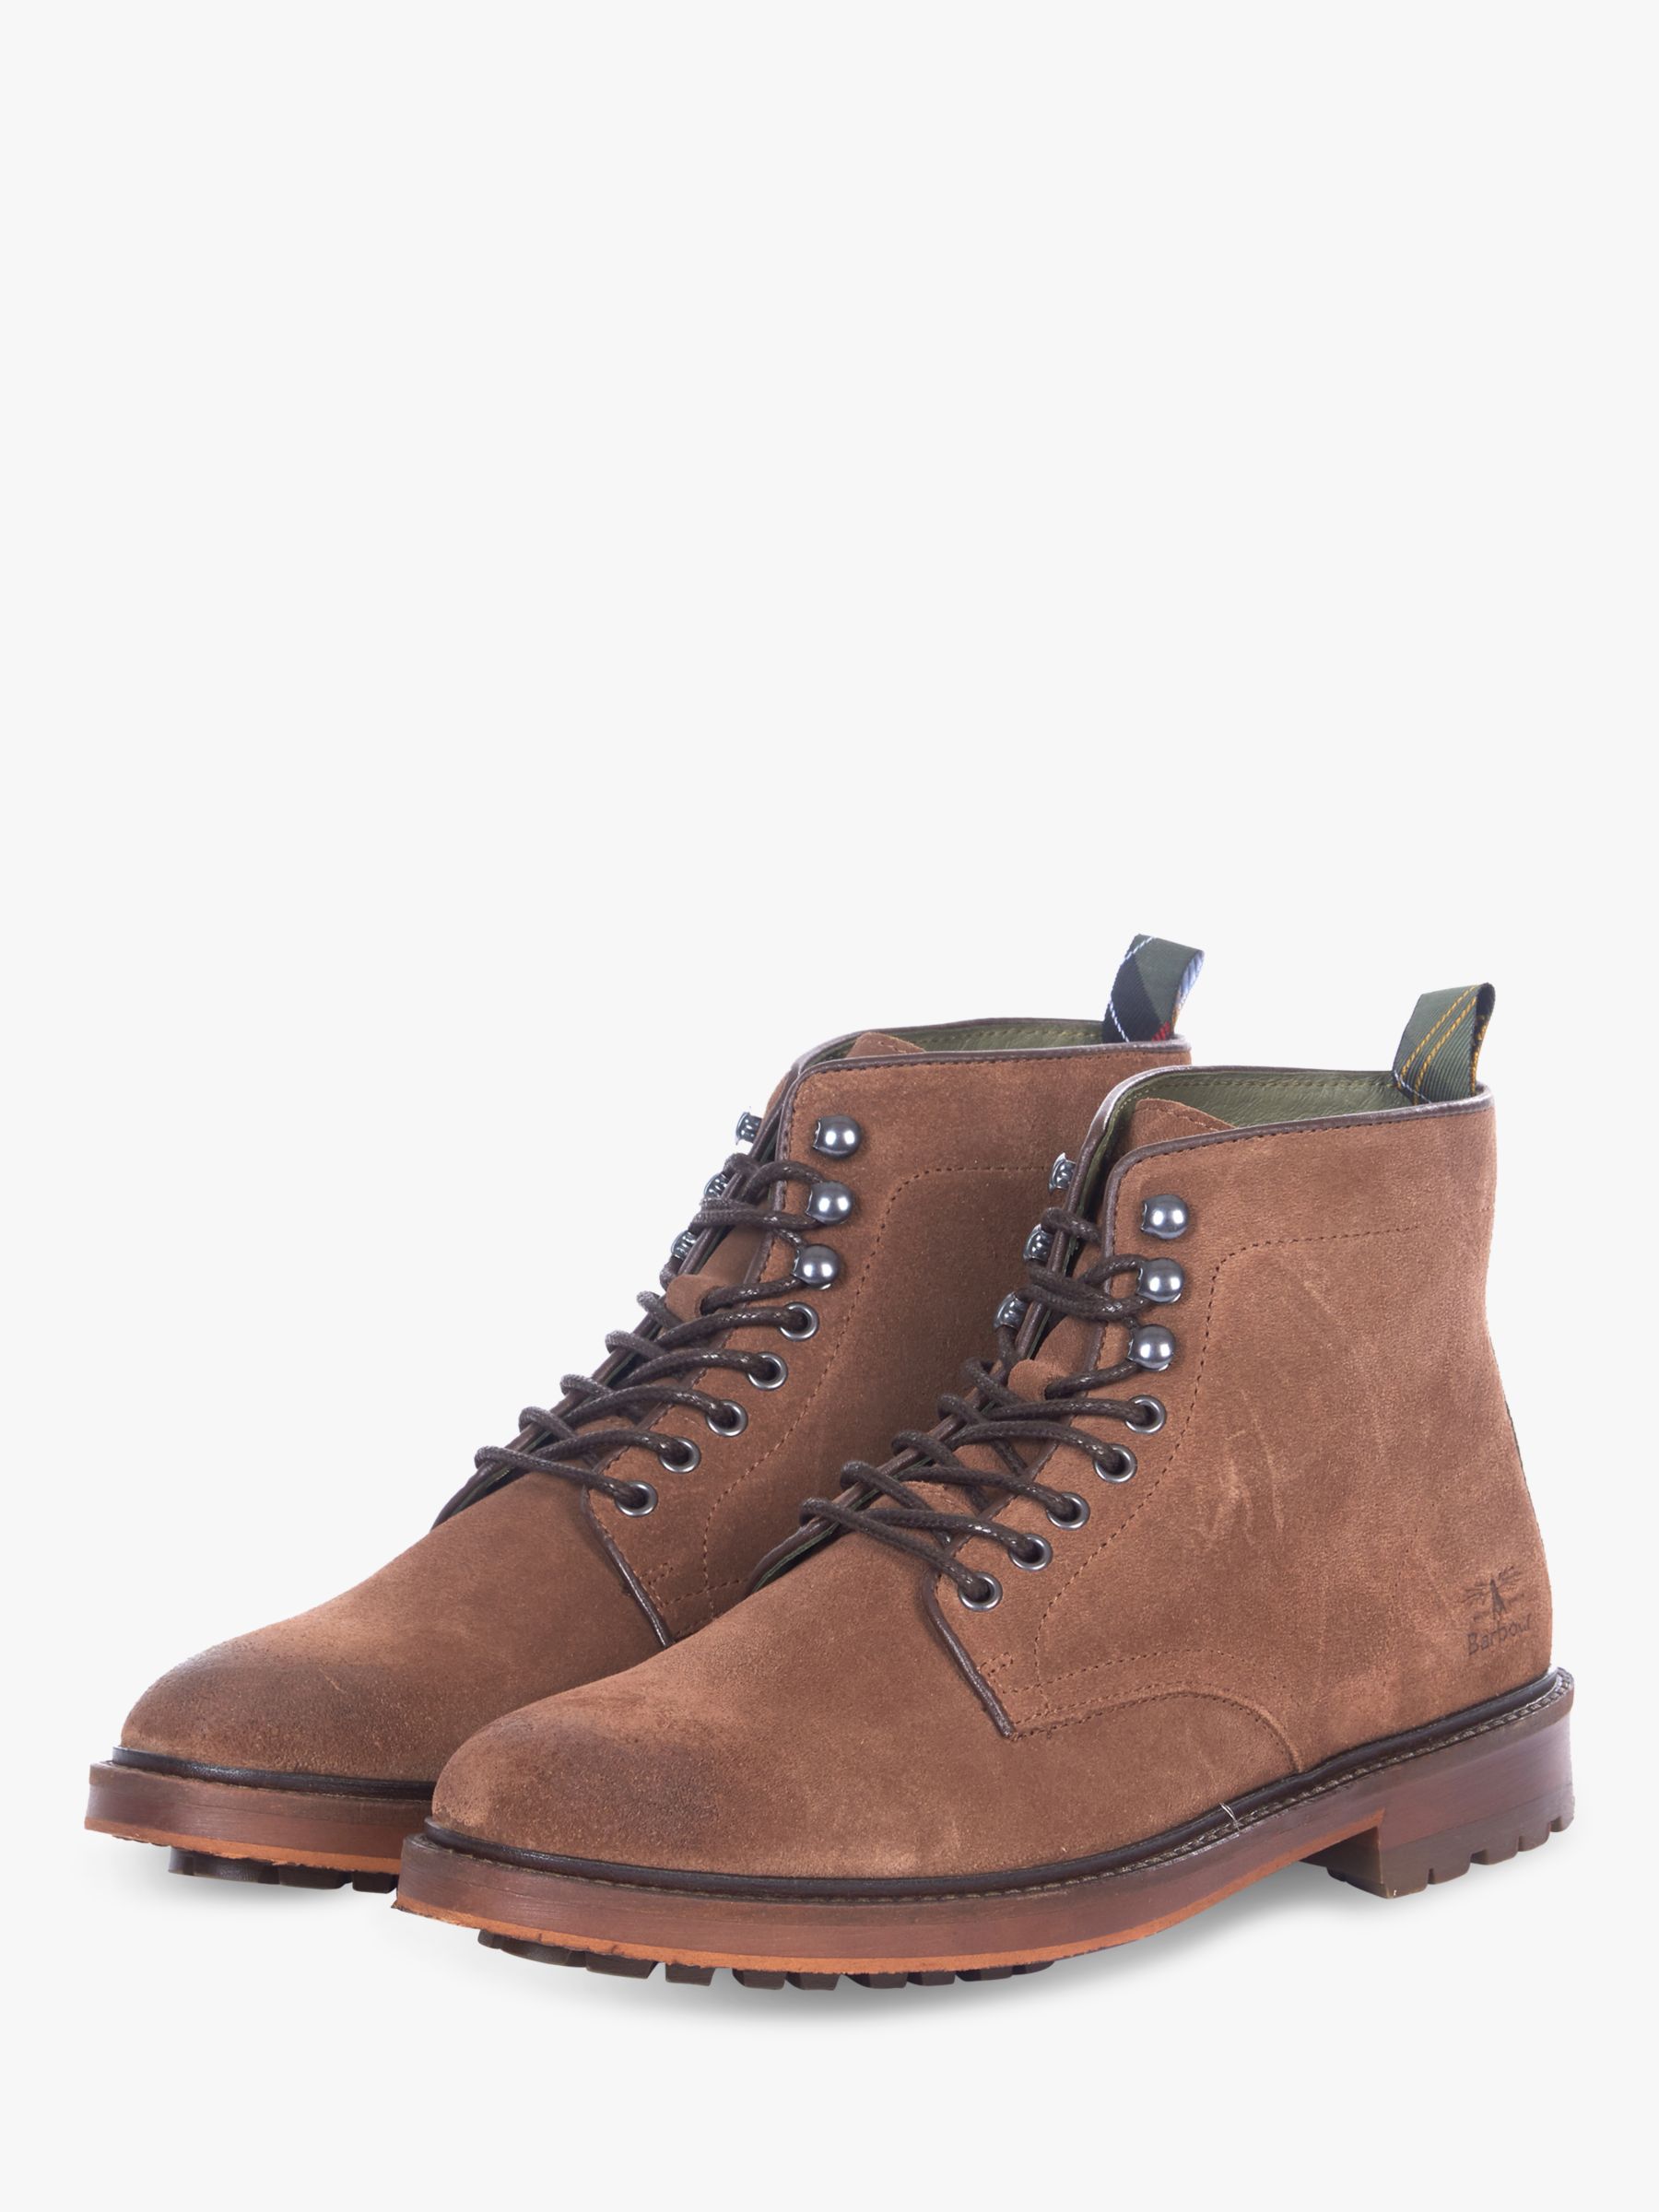 barbour mens suede boots